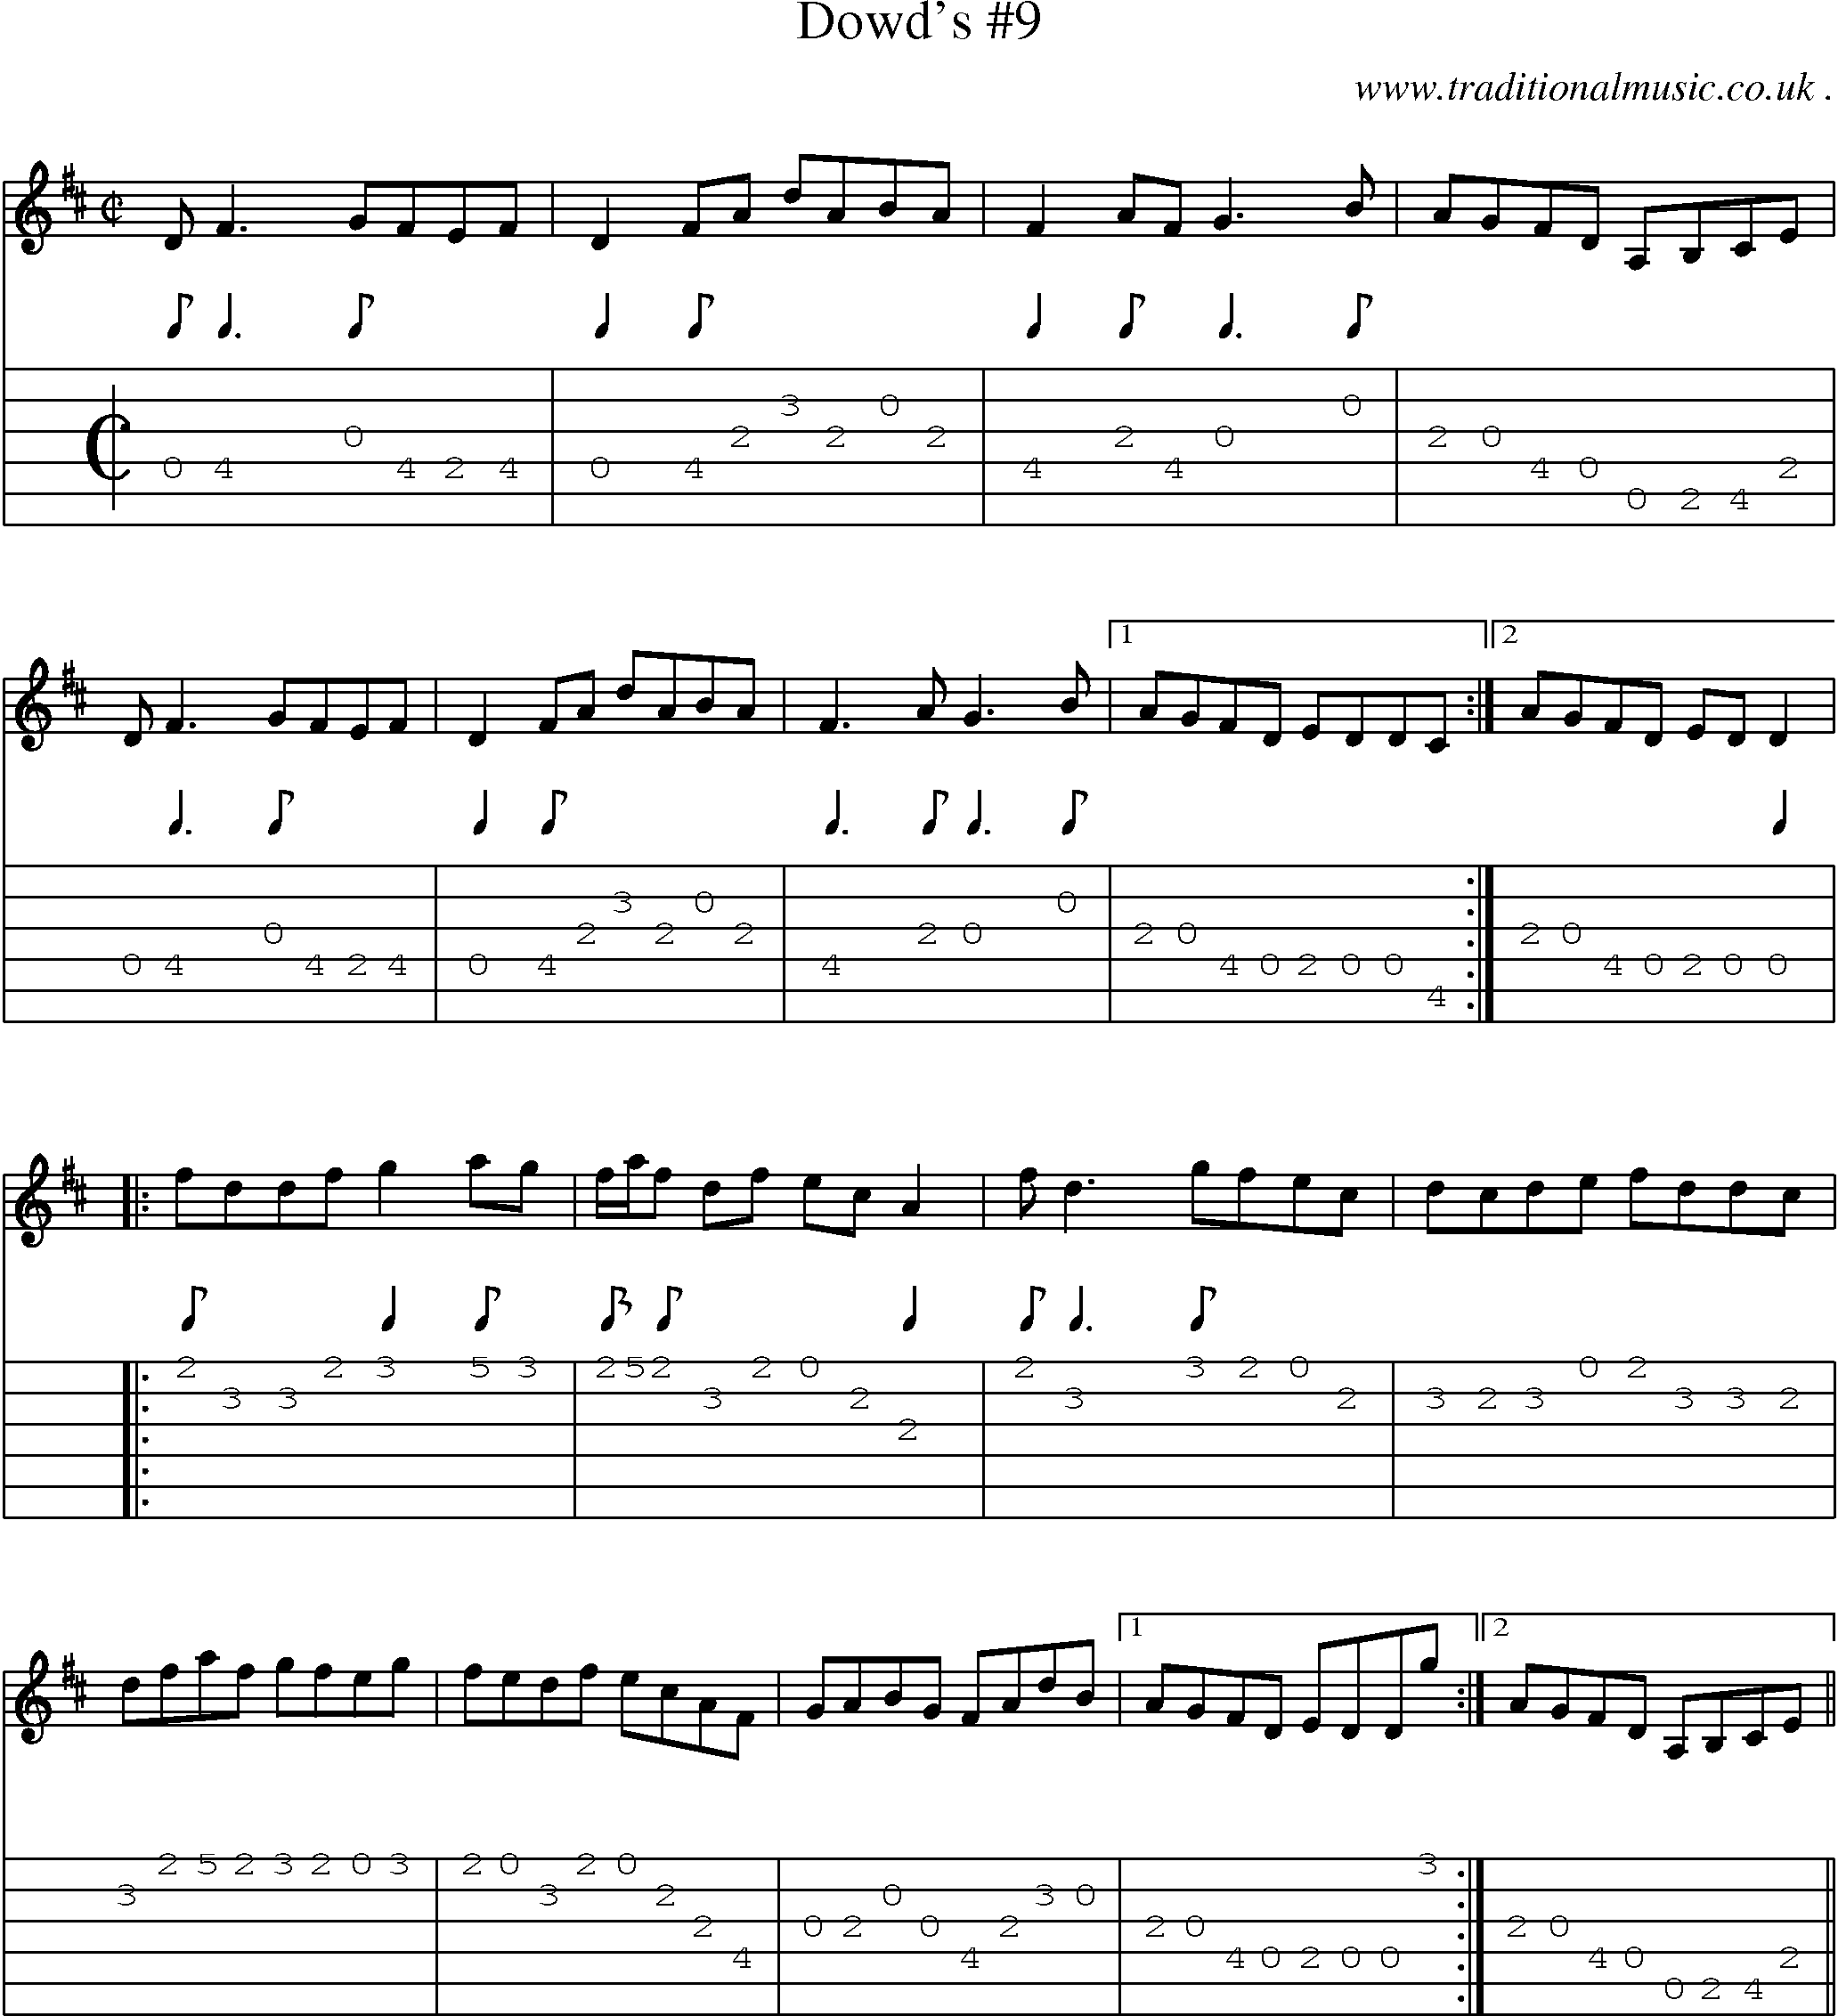 Sheet-Music and Guitar Tabs for Dowds 9